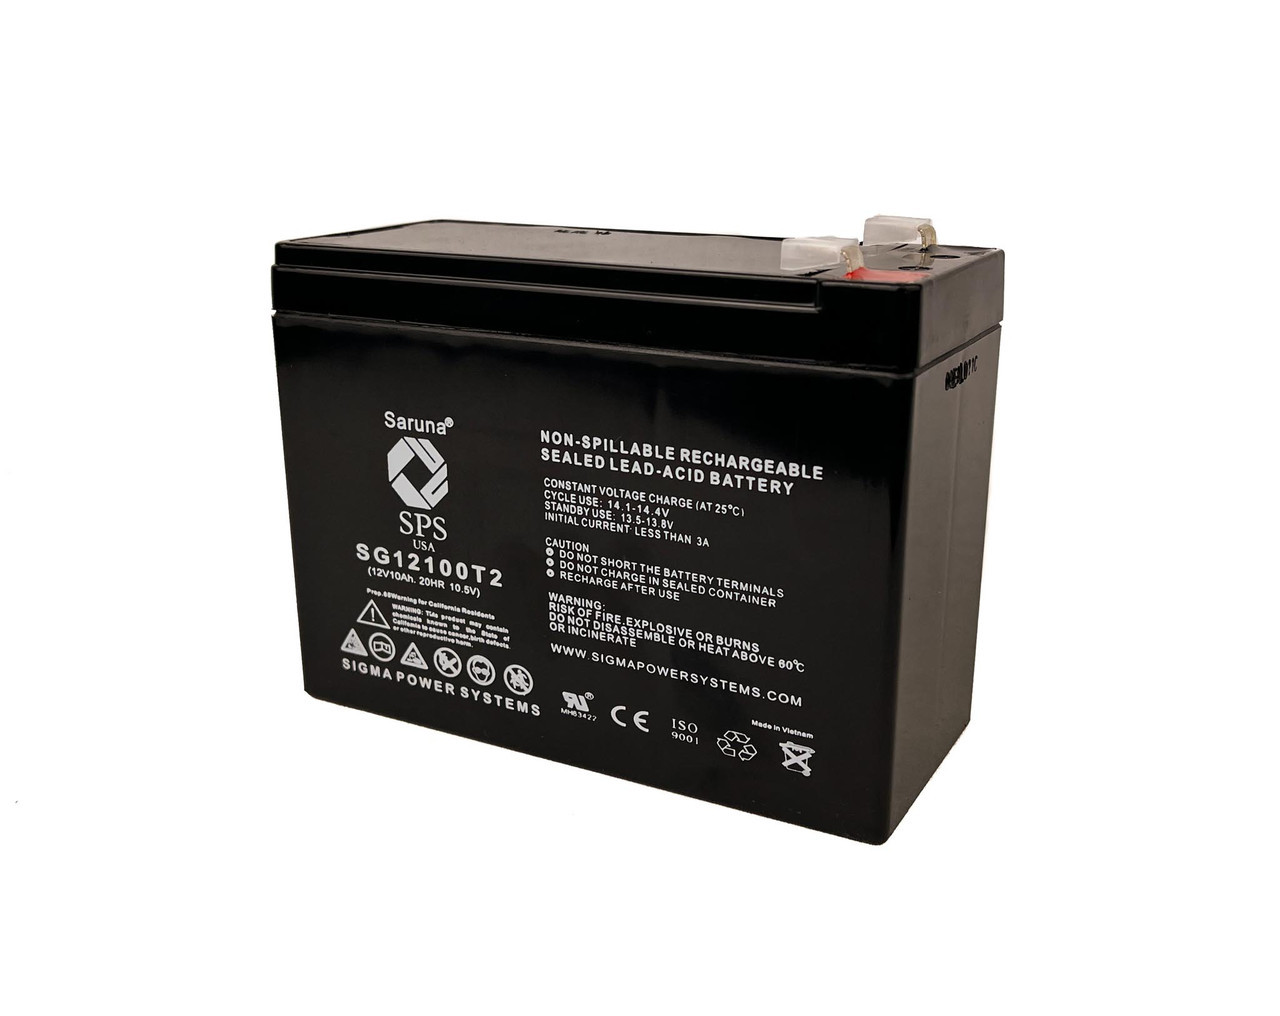 Raion Power 12V 10Ah Non-Spillable Replacement Rechargebale Battery for BSB DC12-9